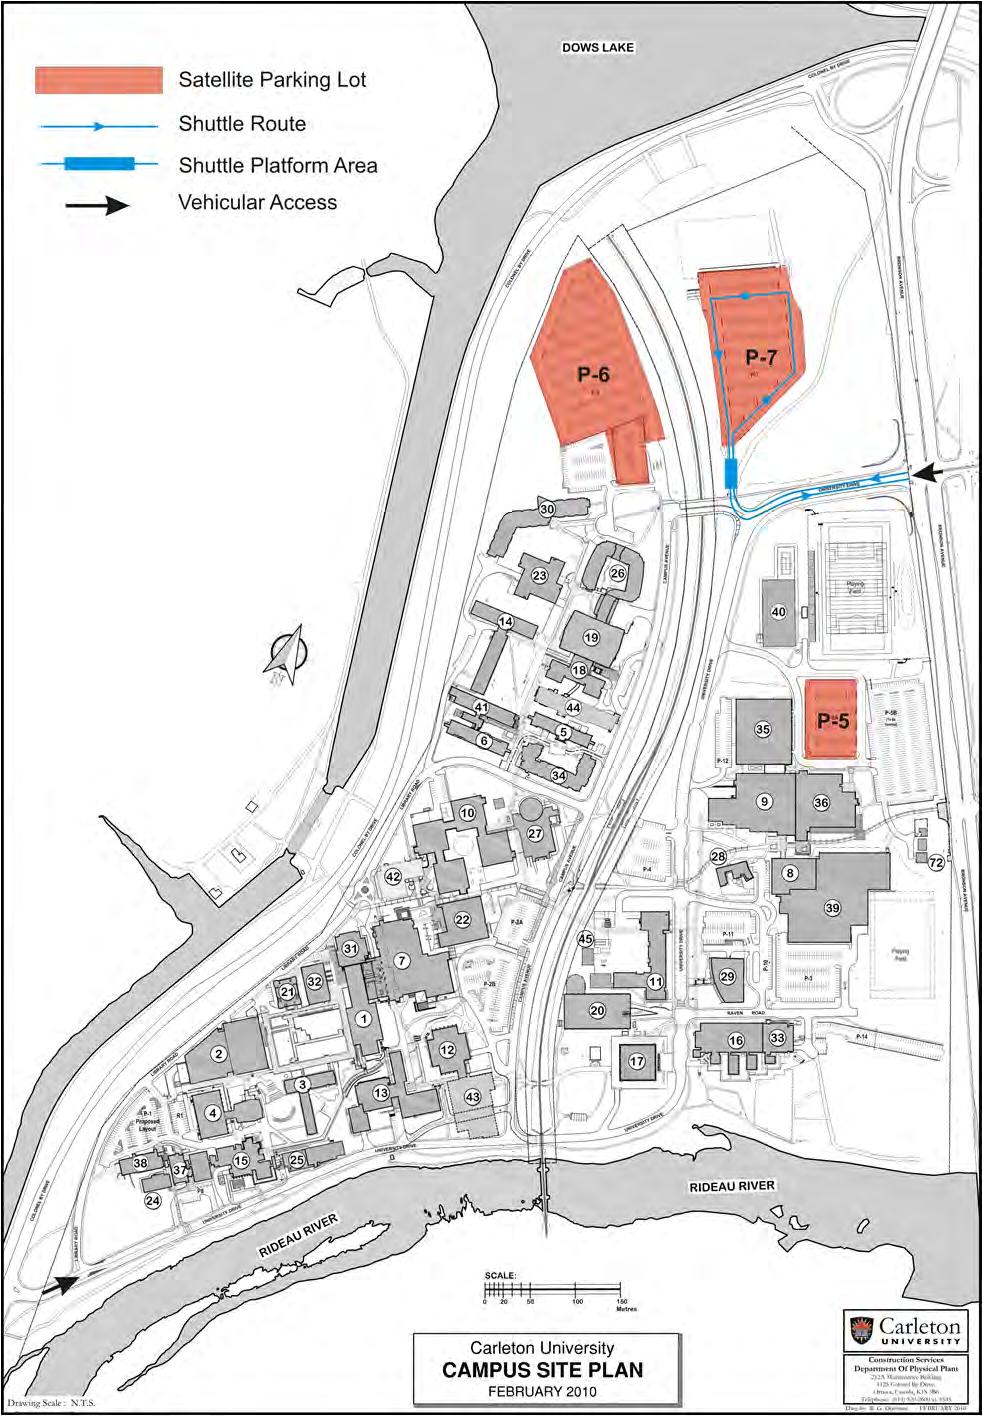 3.3.1 Carleton University Carleton University is located within 2 km of Lansdowne Park and is therefore recommended as the primary satellite parking facility for special events.